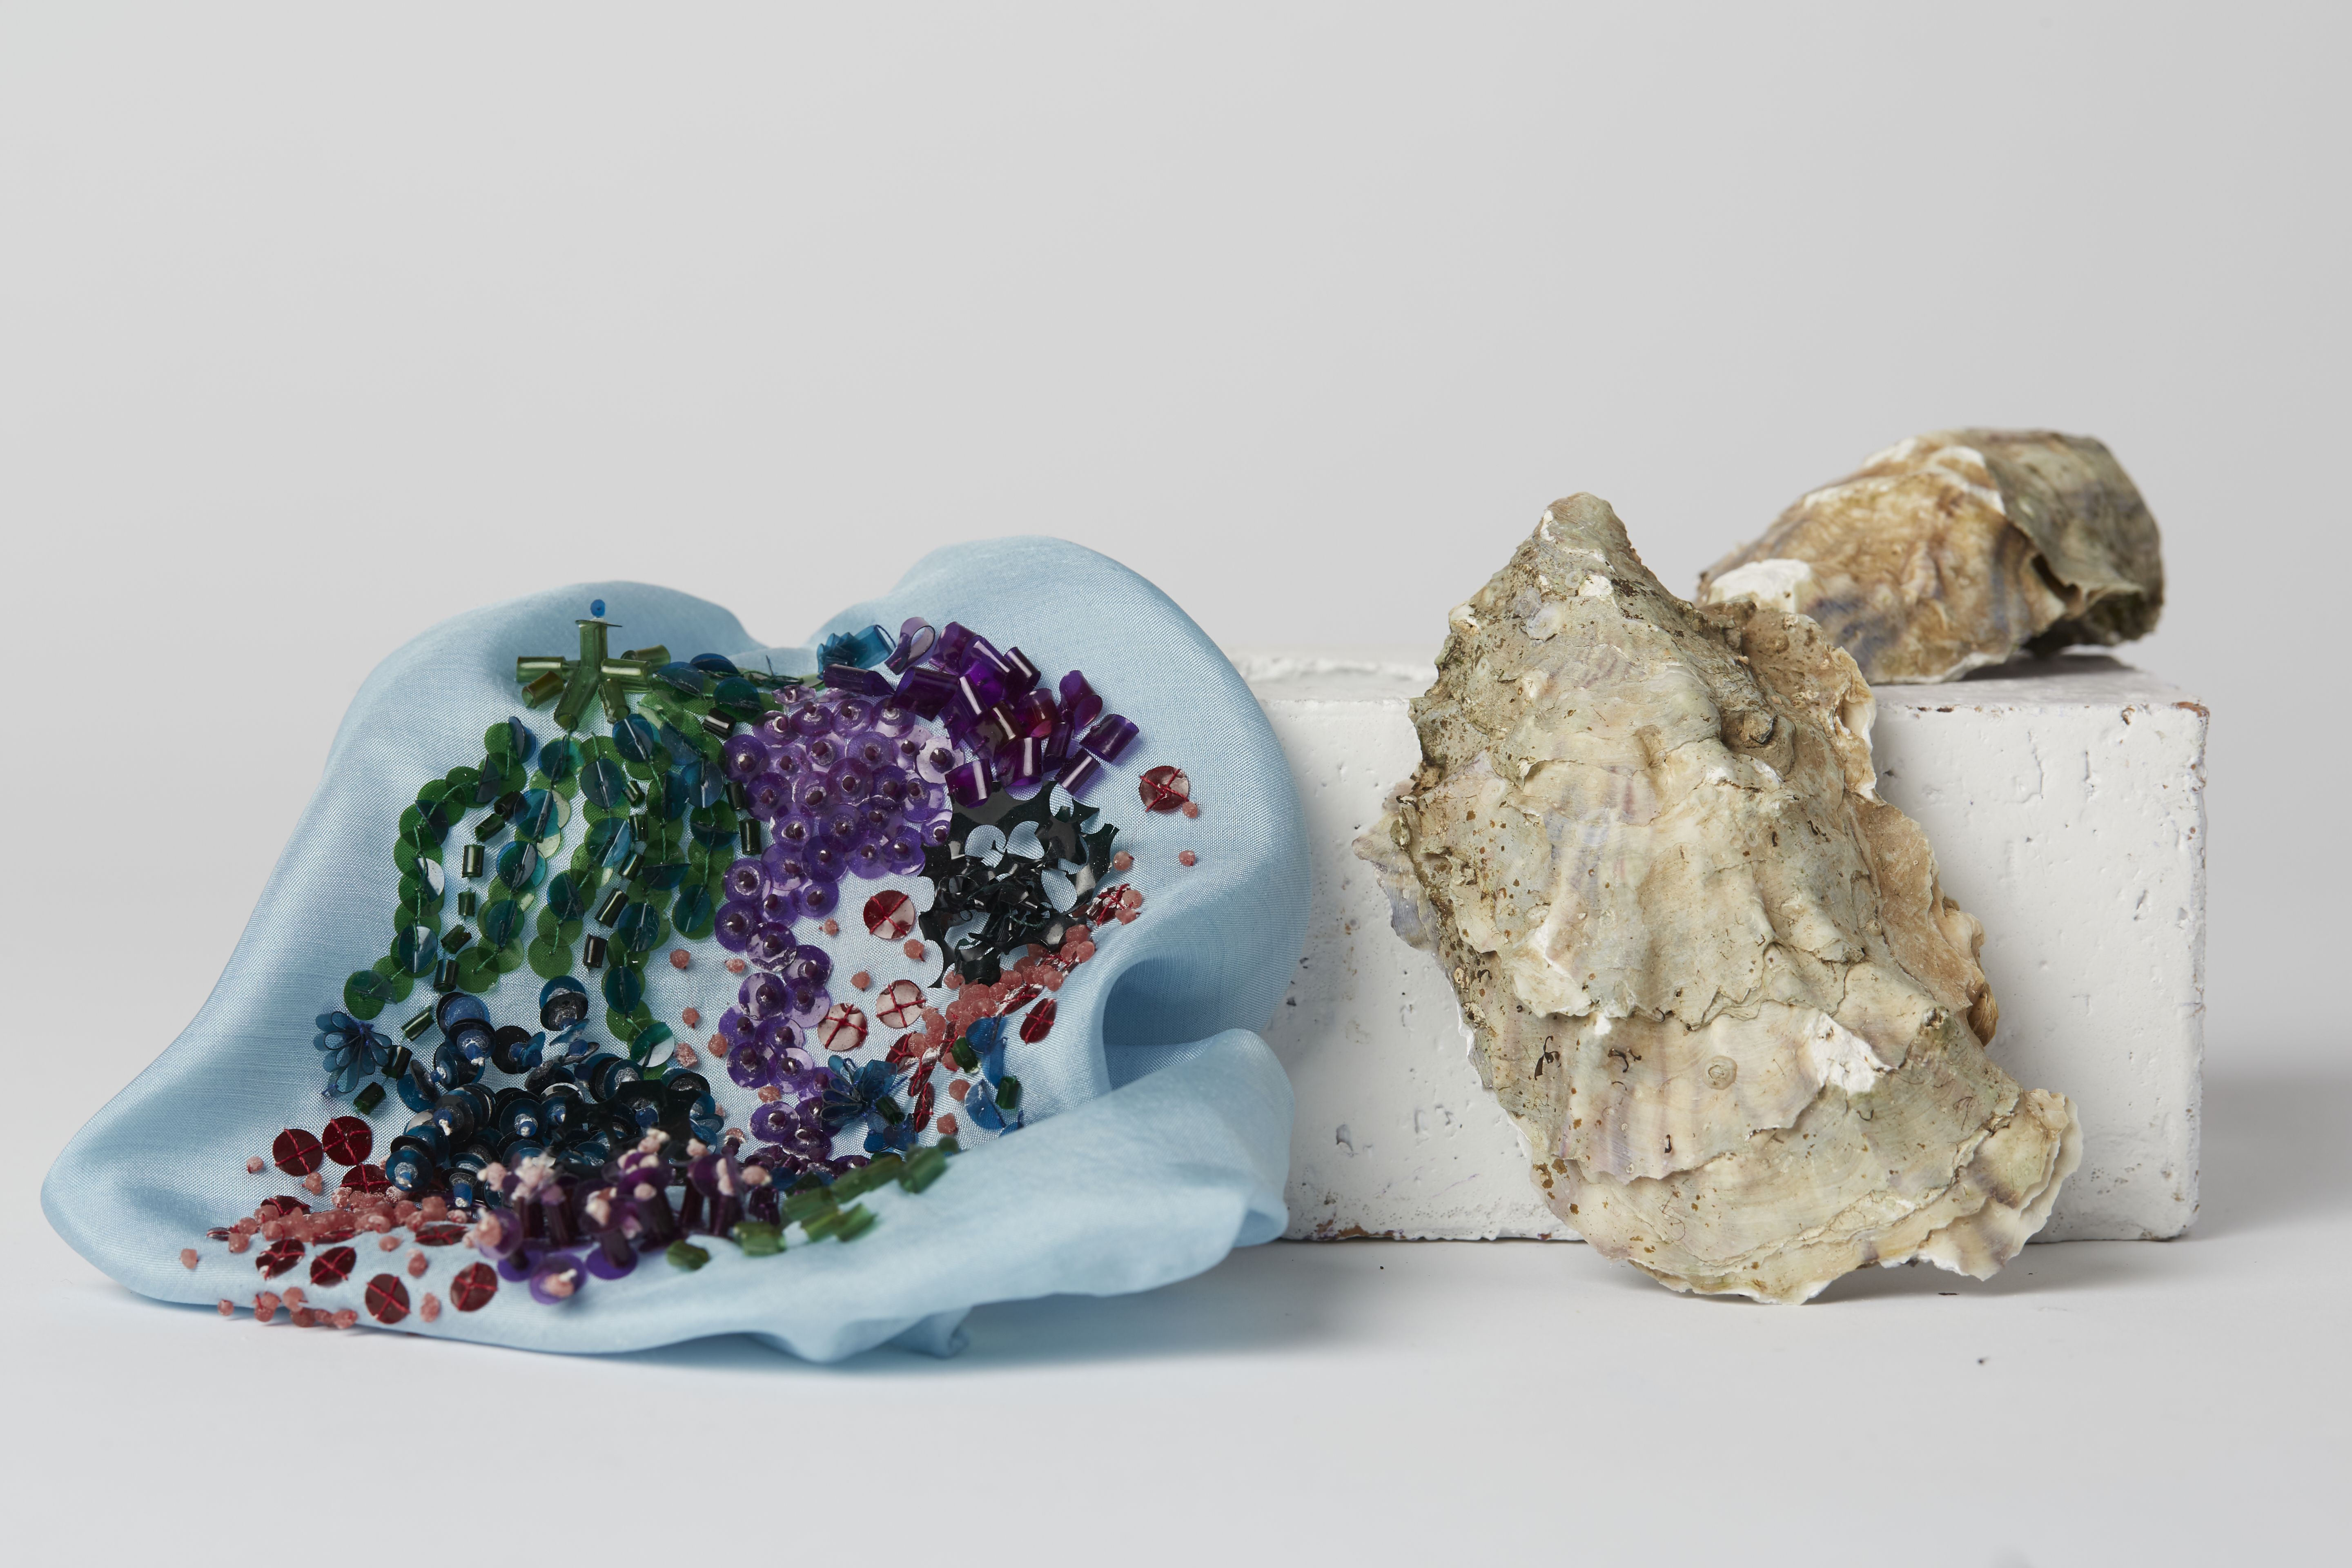 Biodegradable sequins in green, purple and red alongside an oyster shell